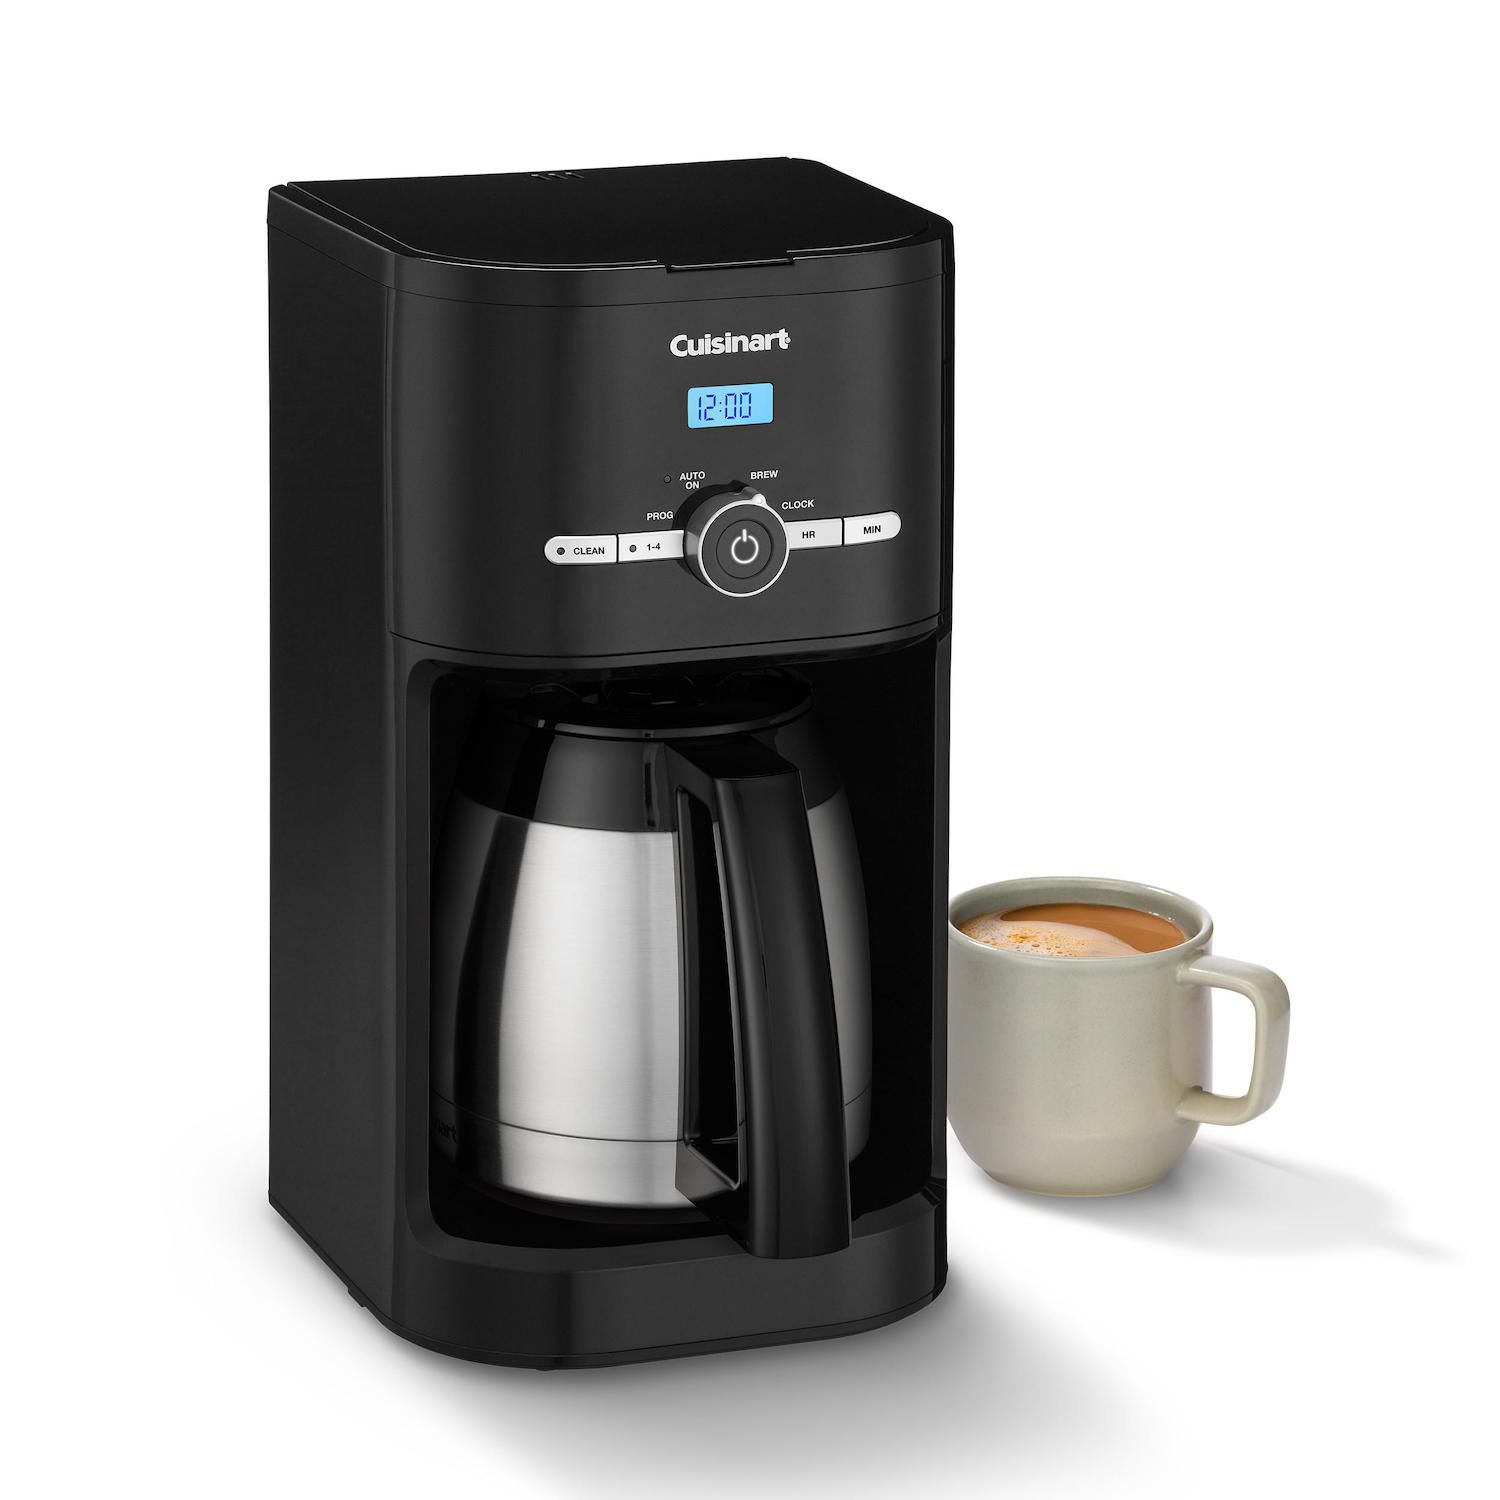 KENMORE Elite Grind and Brew black 12- Cup Coffee Maker with Burr